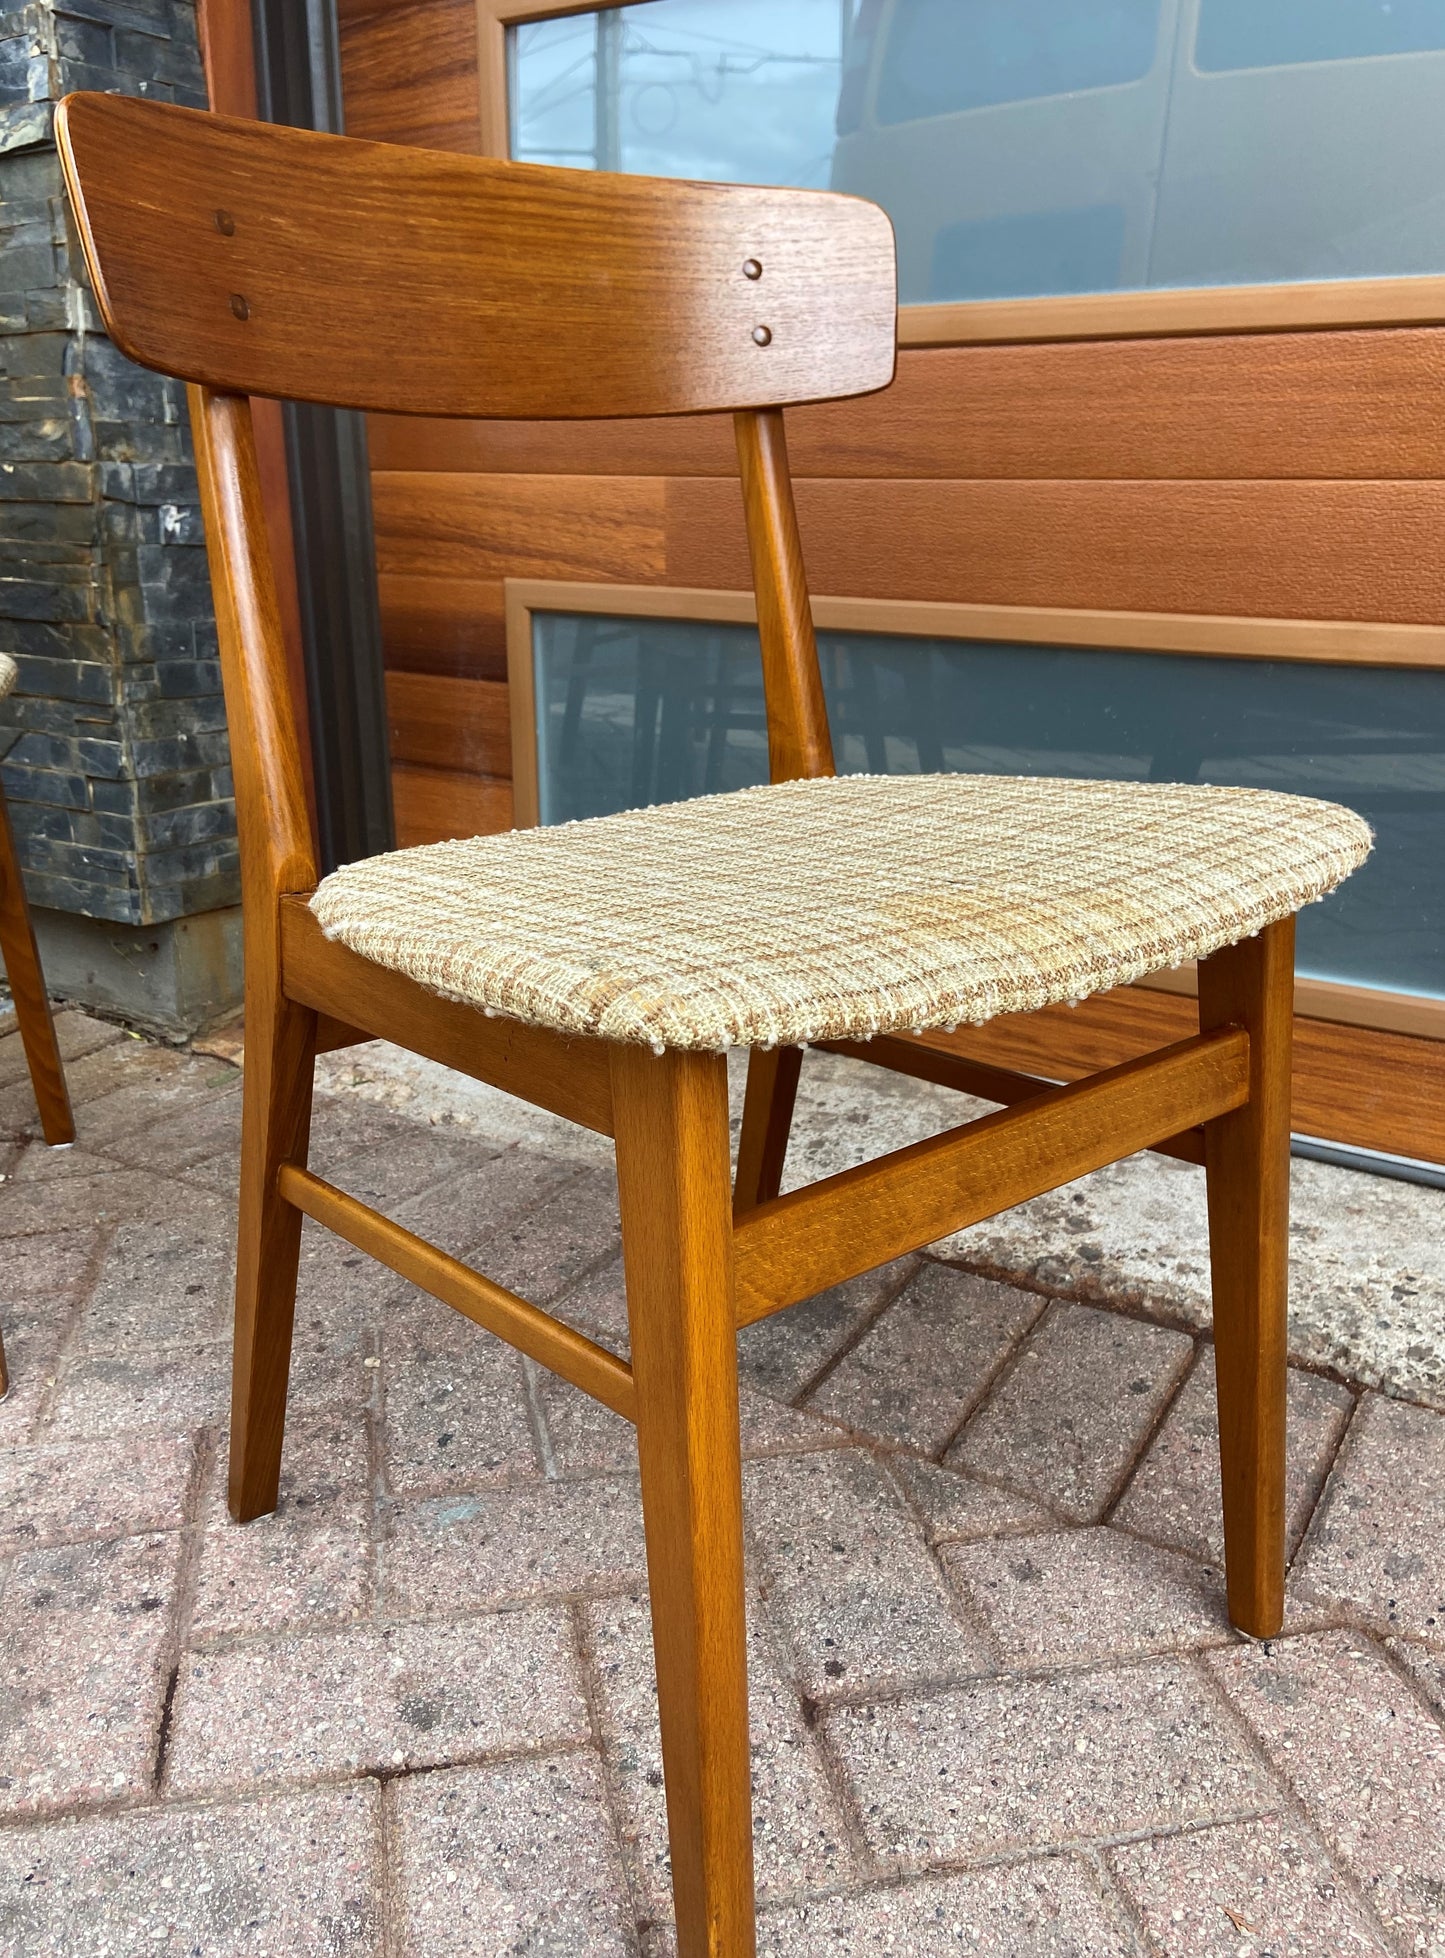 4 Danish Mid Century Modern Teak Chairs by Farstrup, will be REUPHOLSTERED